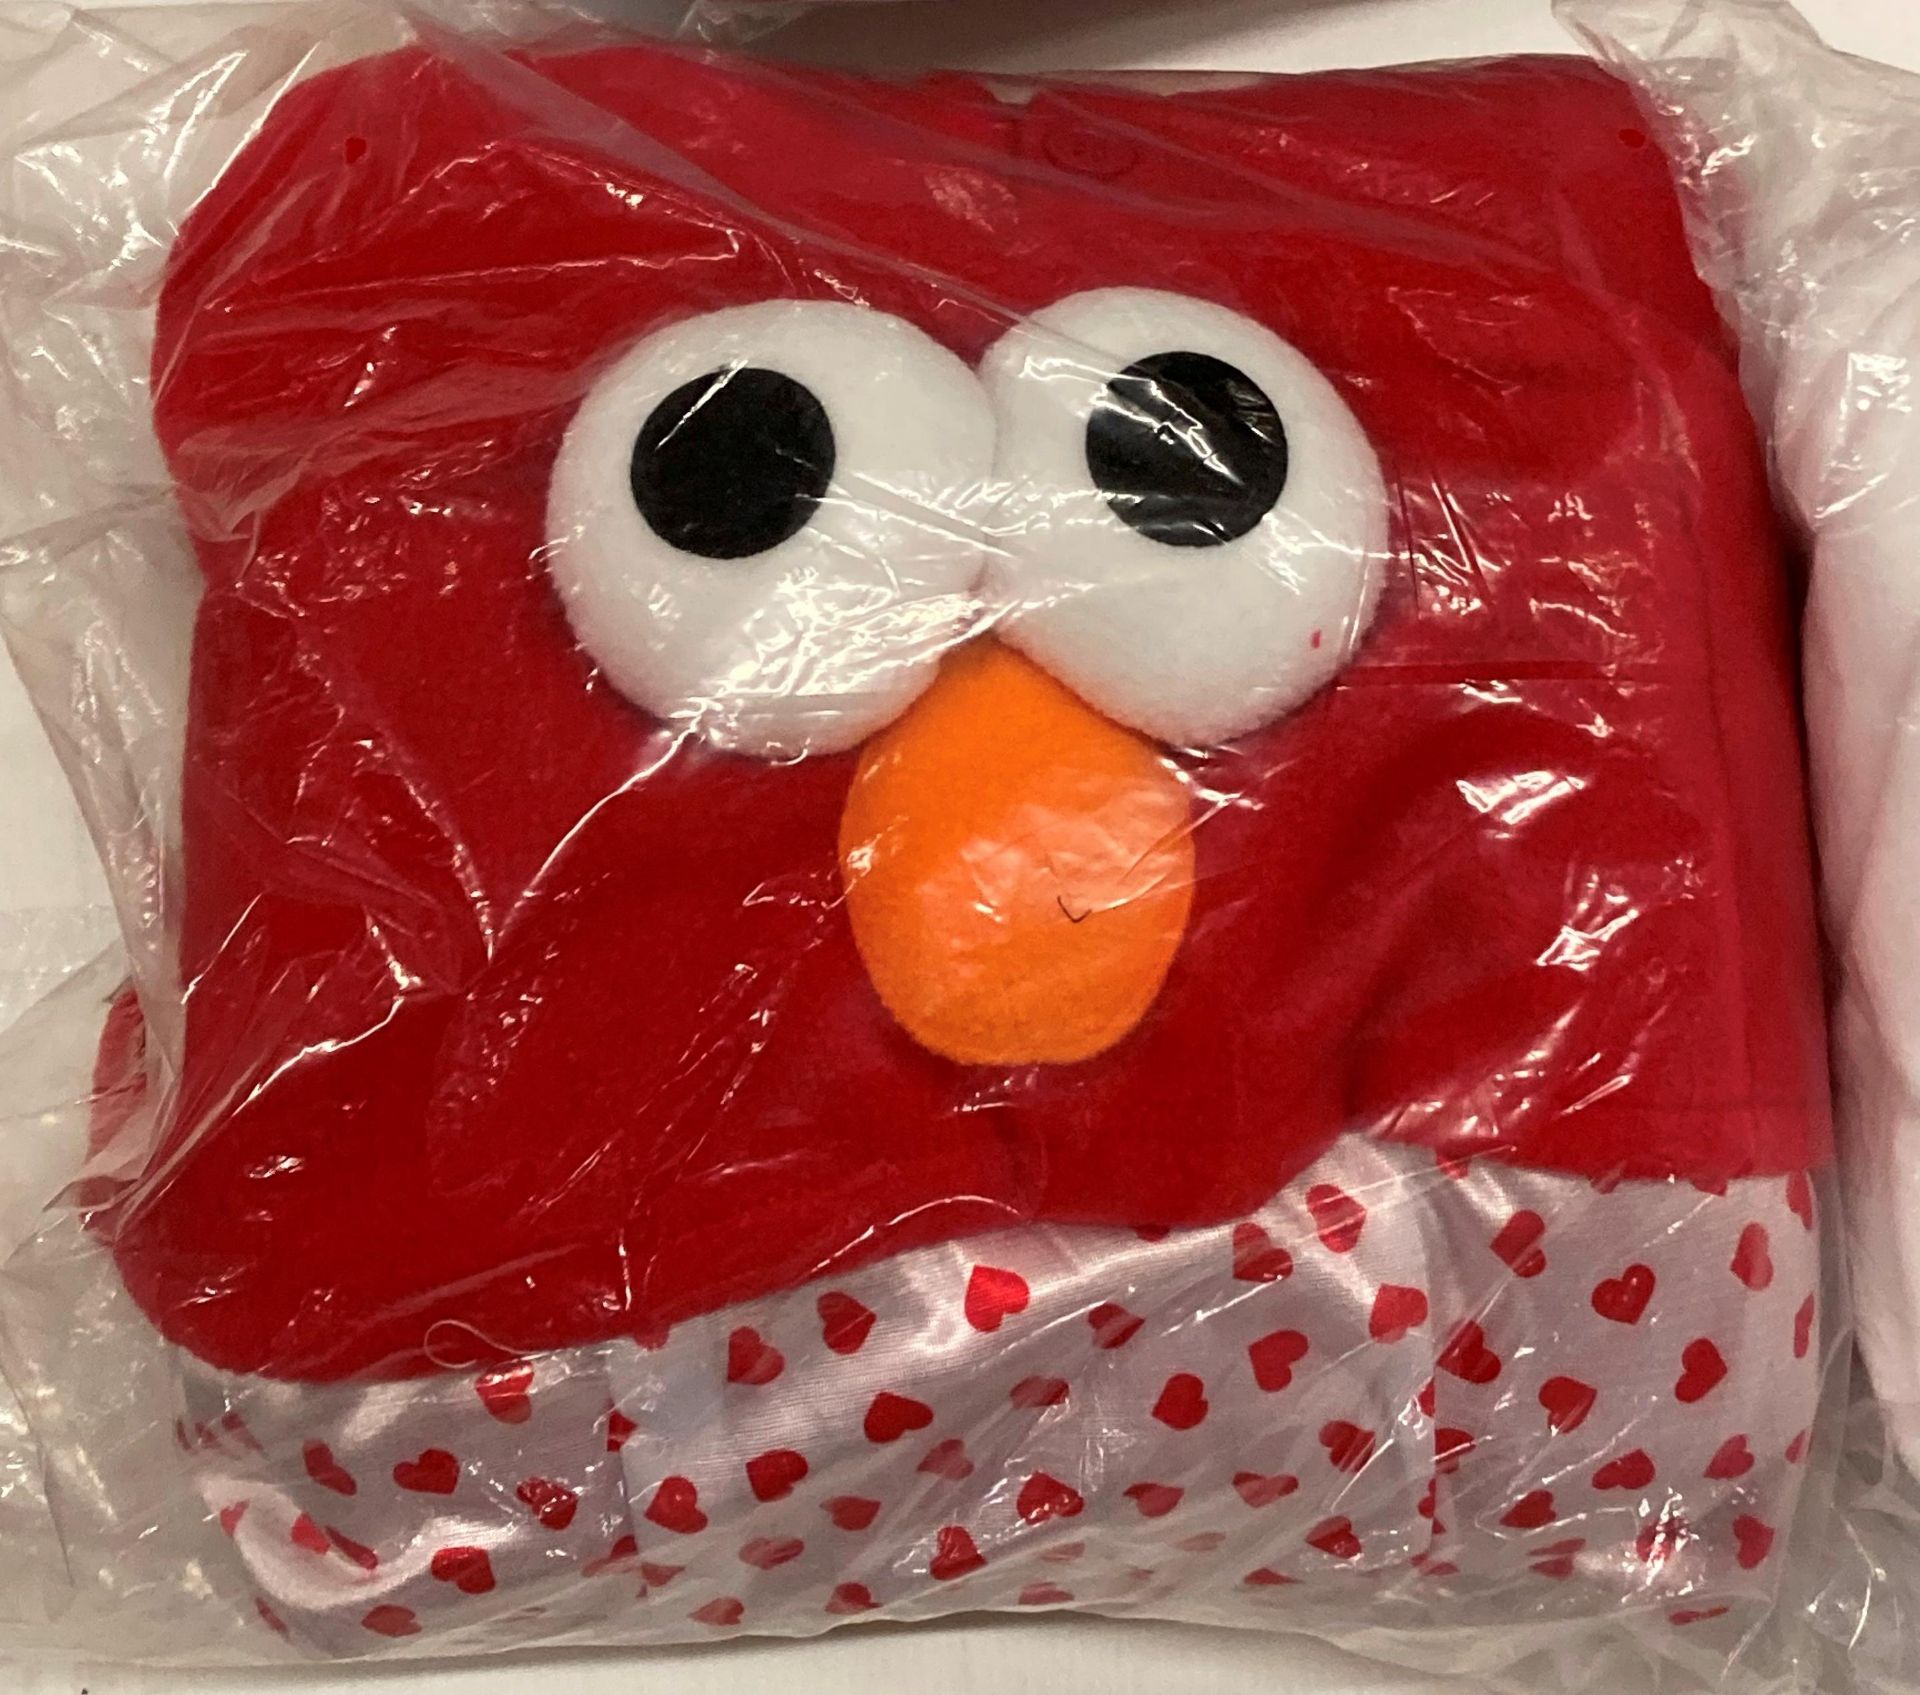 10 x assorted size red Elmo onesies by Wanziee (saleroom location: L05 floor) Further